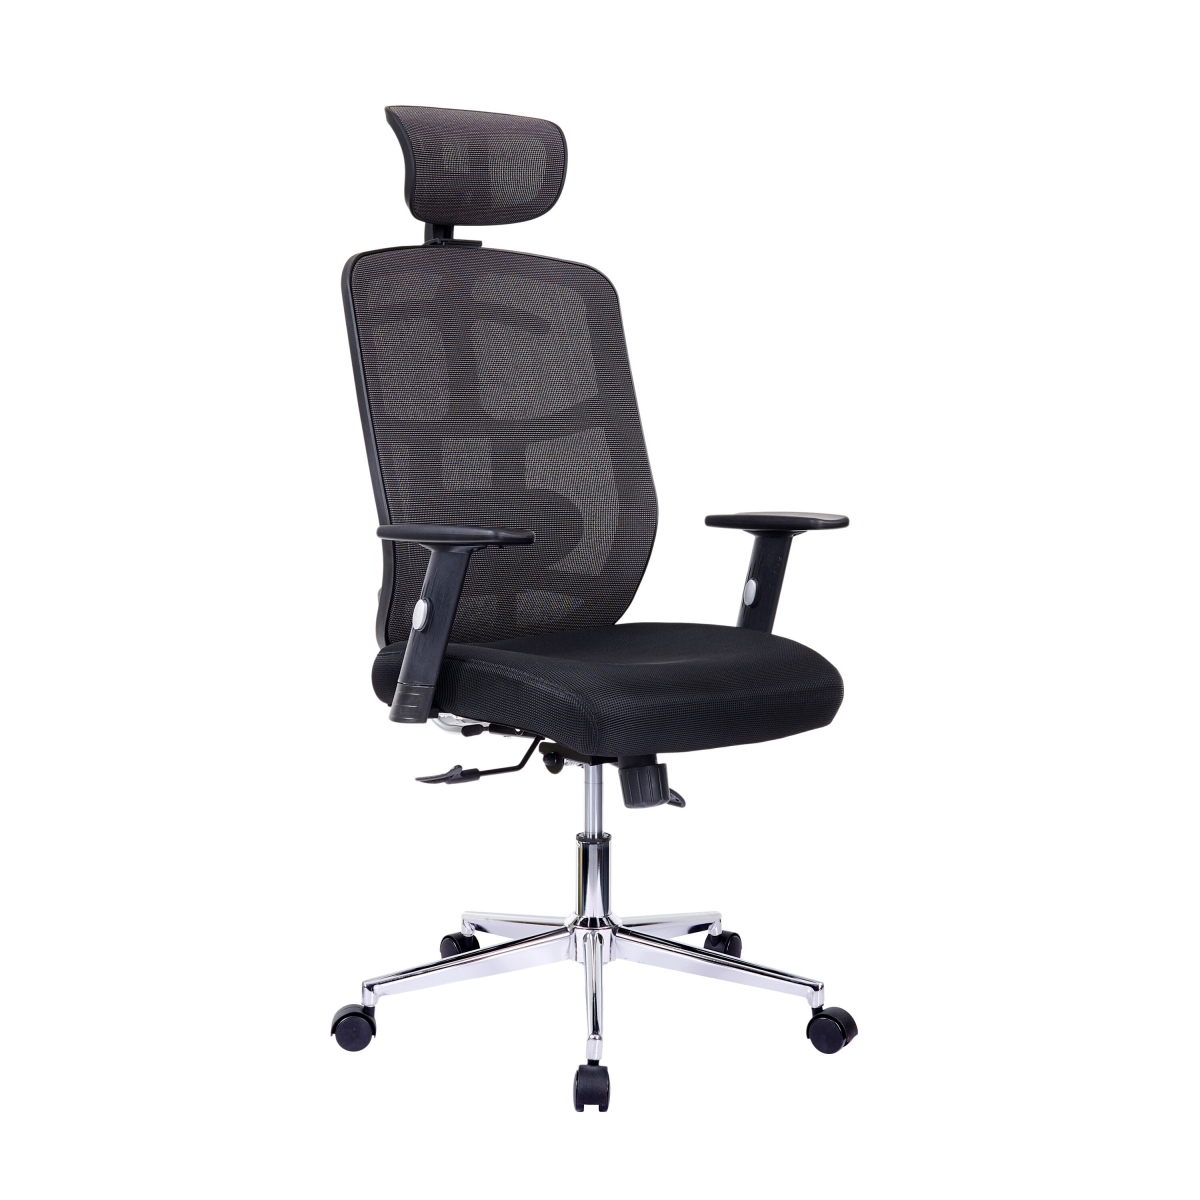 Rta-1010-bk High Back Executive Mesh Office Chair With Arms, Lumbar Support & Chrome Base, Black - 26 X 26 X 42.75 In.